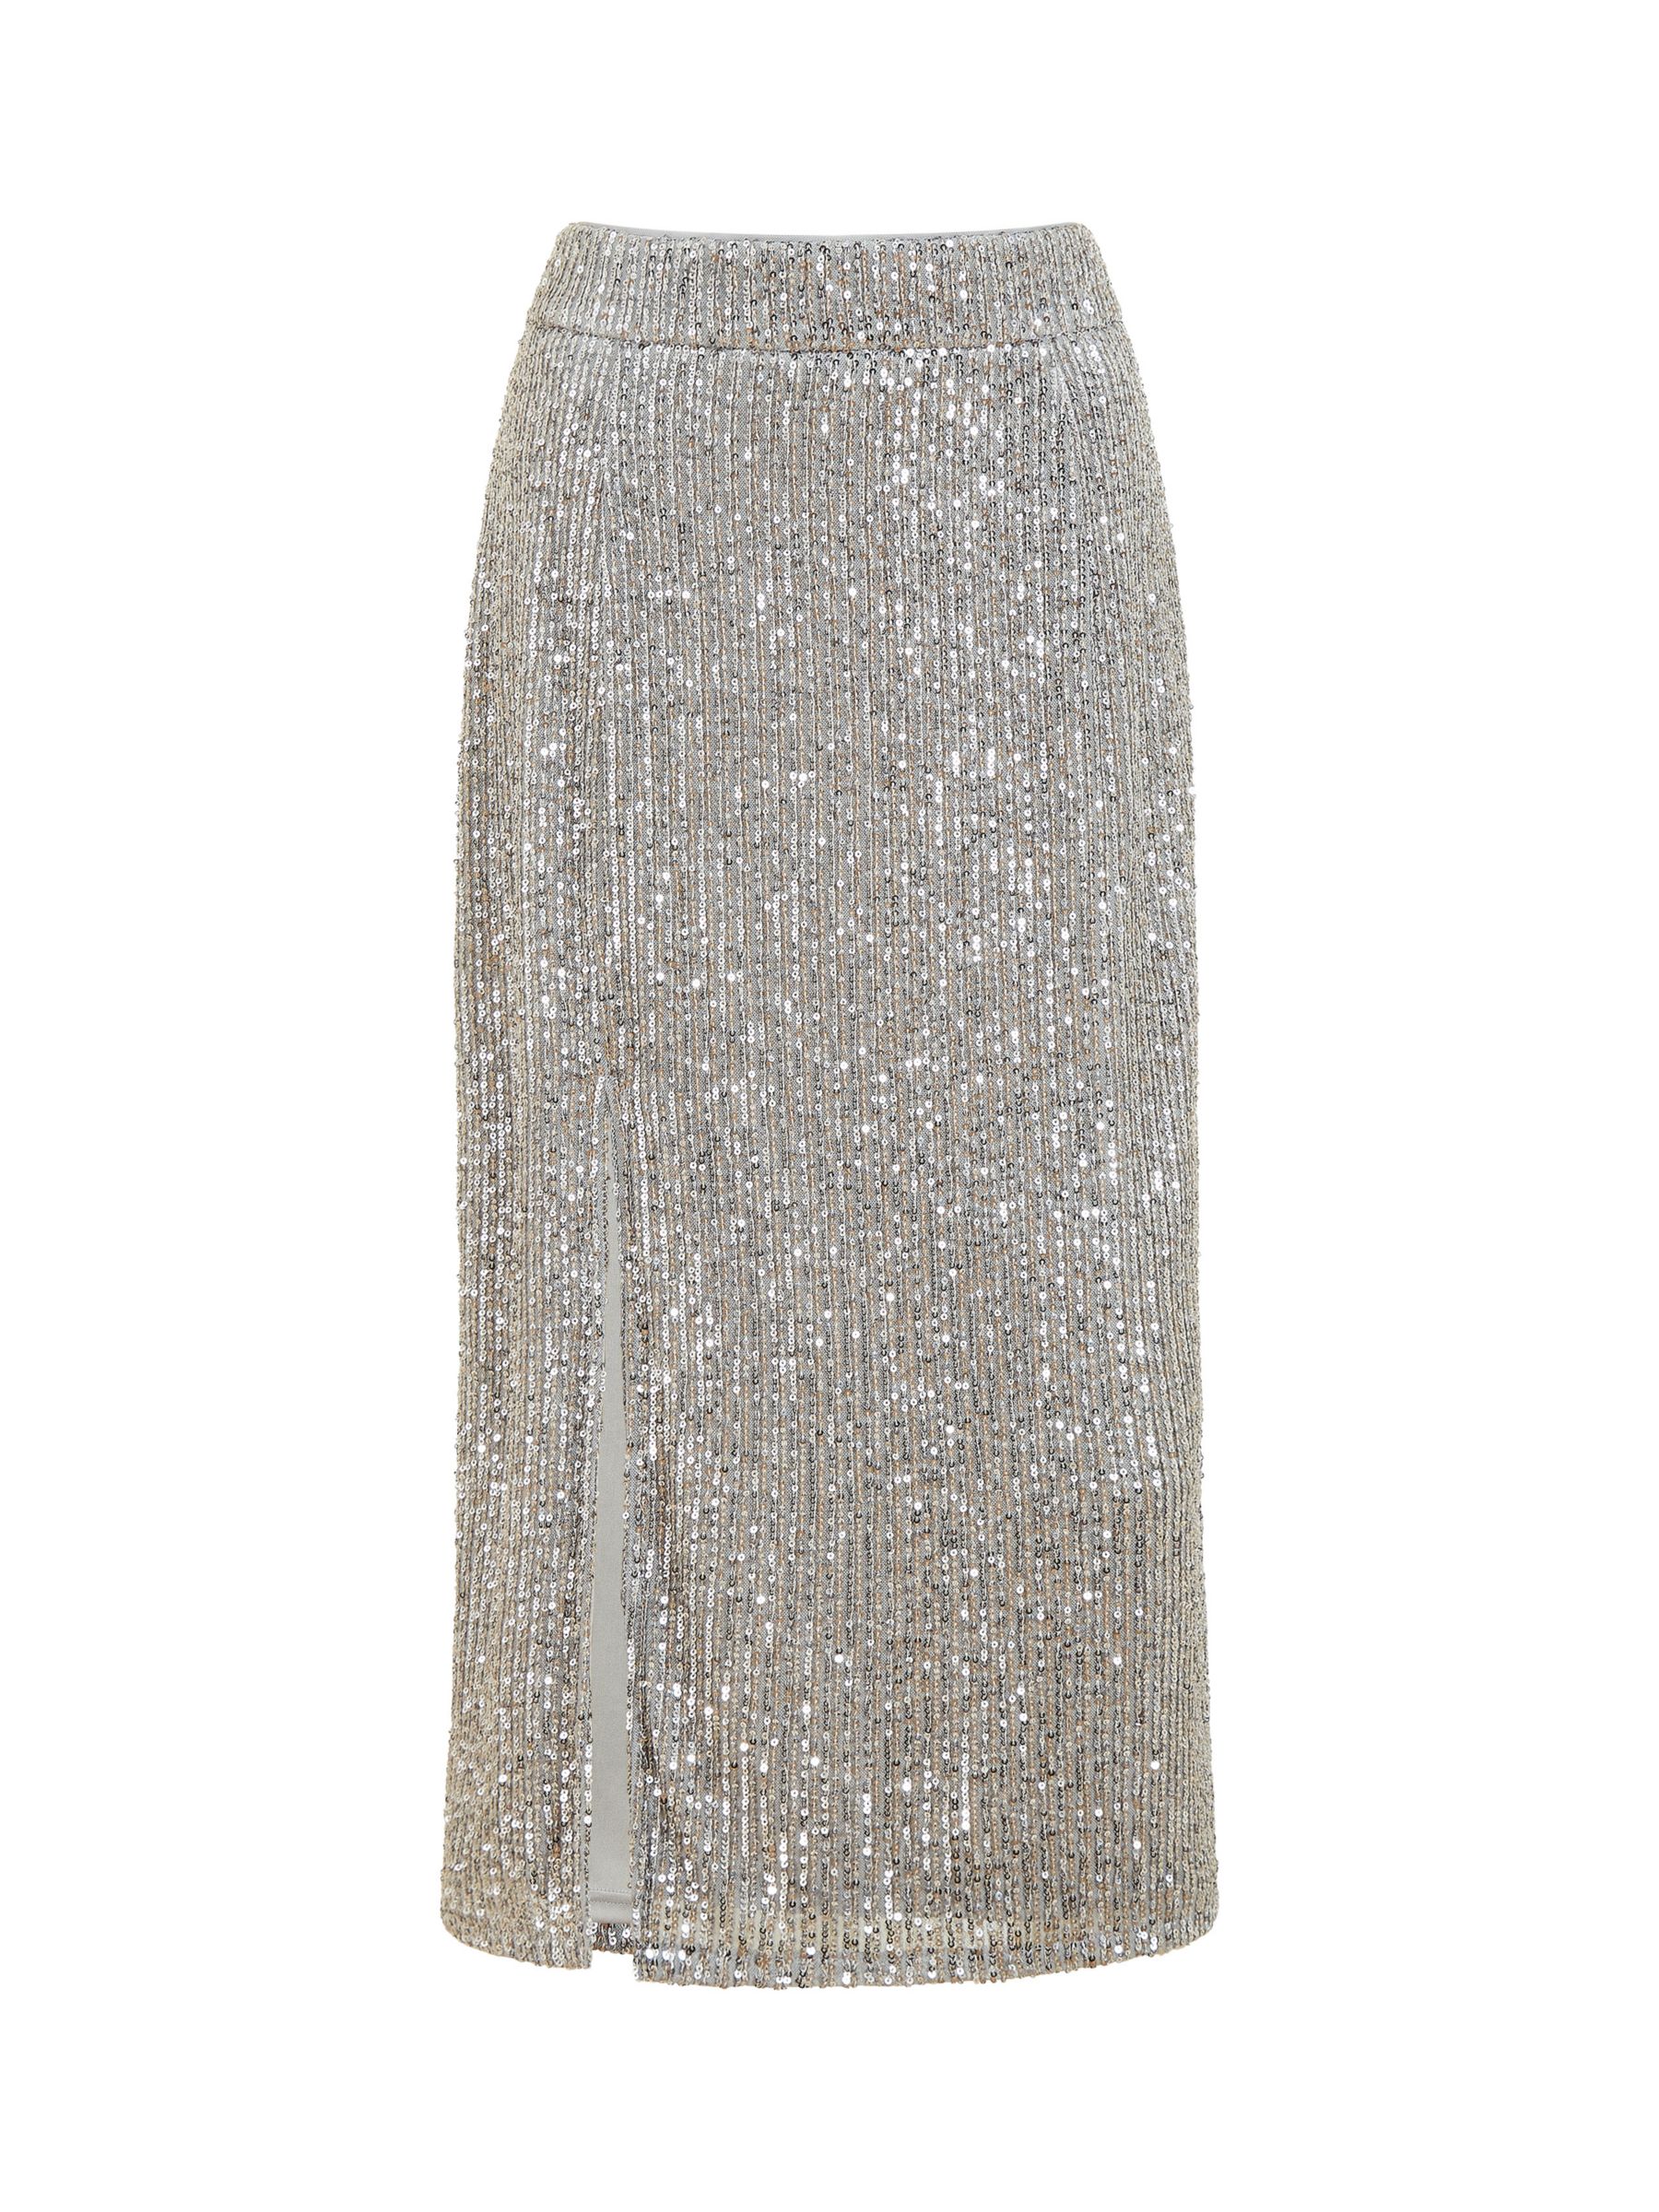 Yumi Sequin Fitted Midi Skirt, Silver, 8